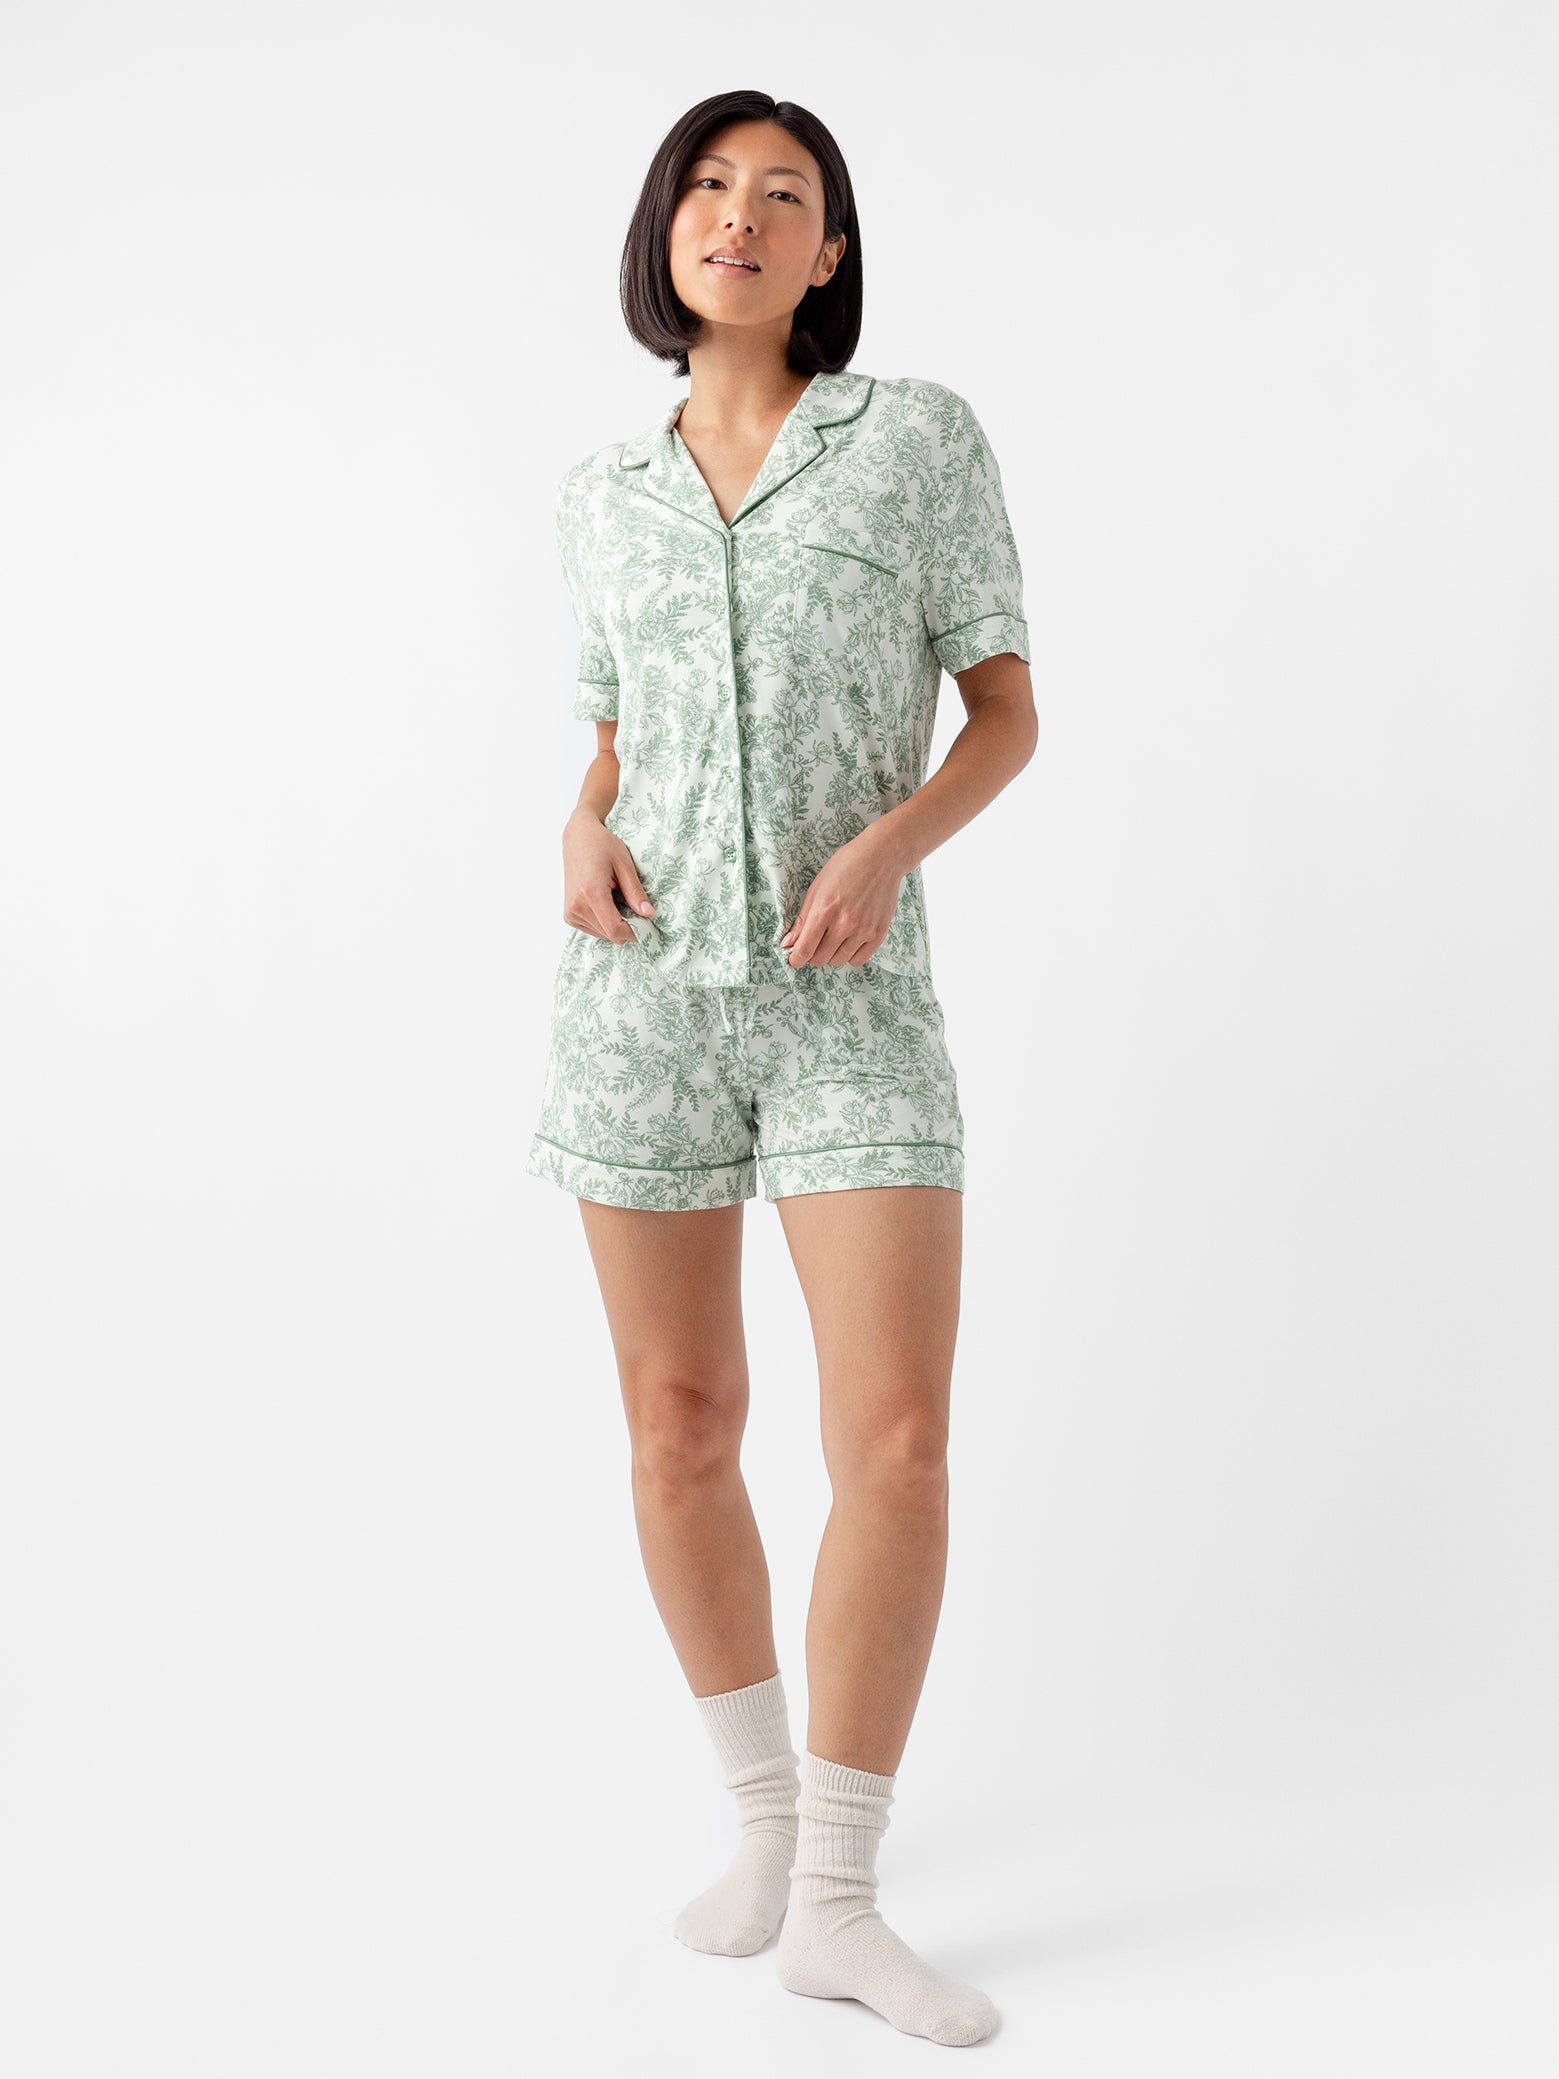 Woman in short sleeve celadon toile pajama set with white background 